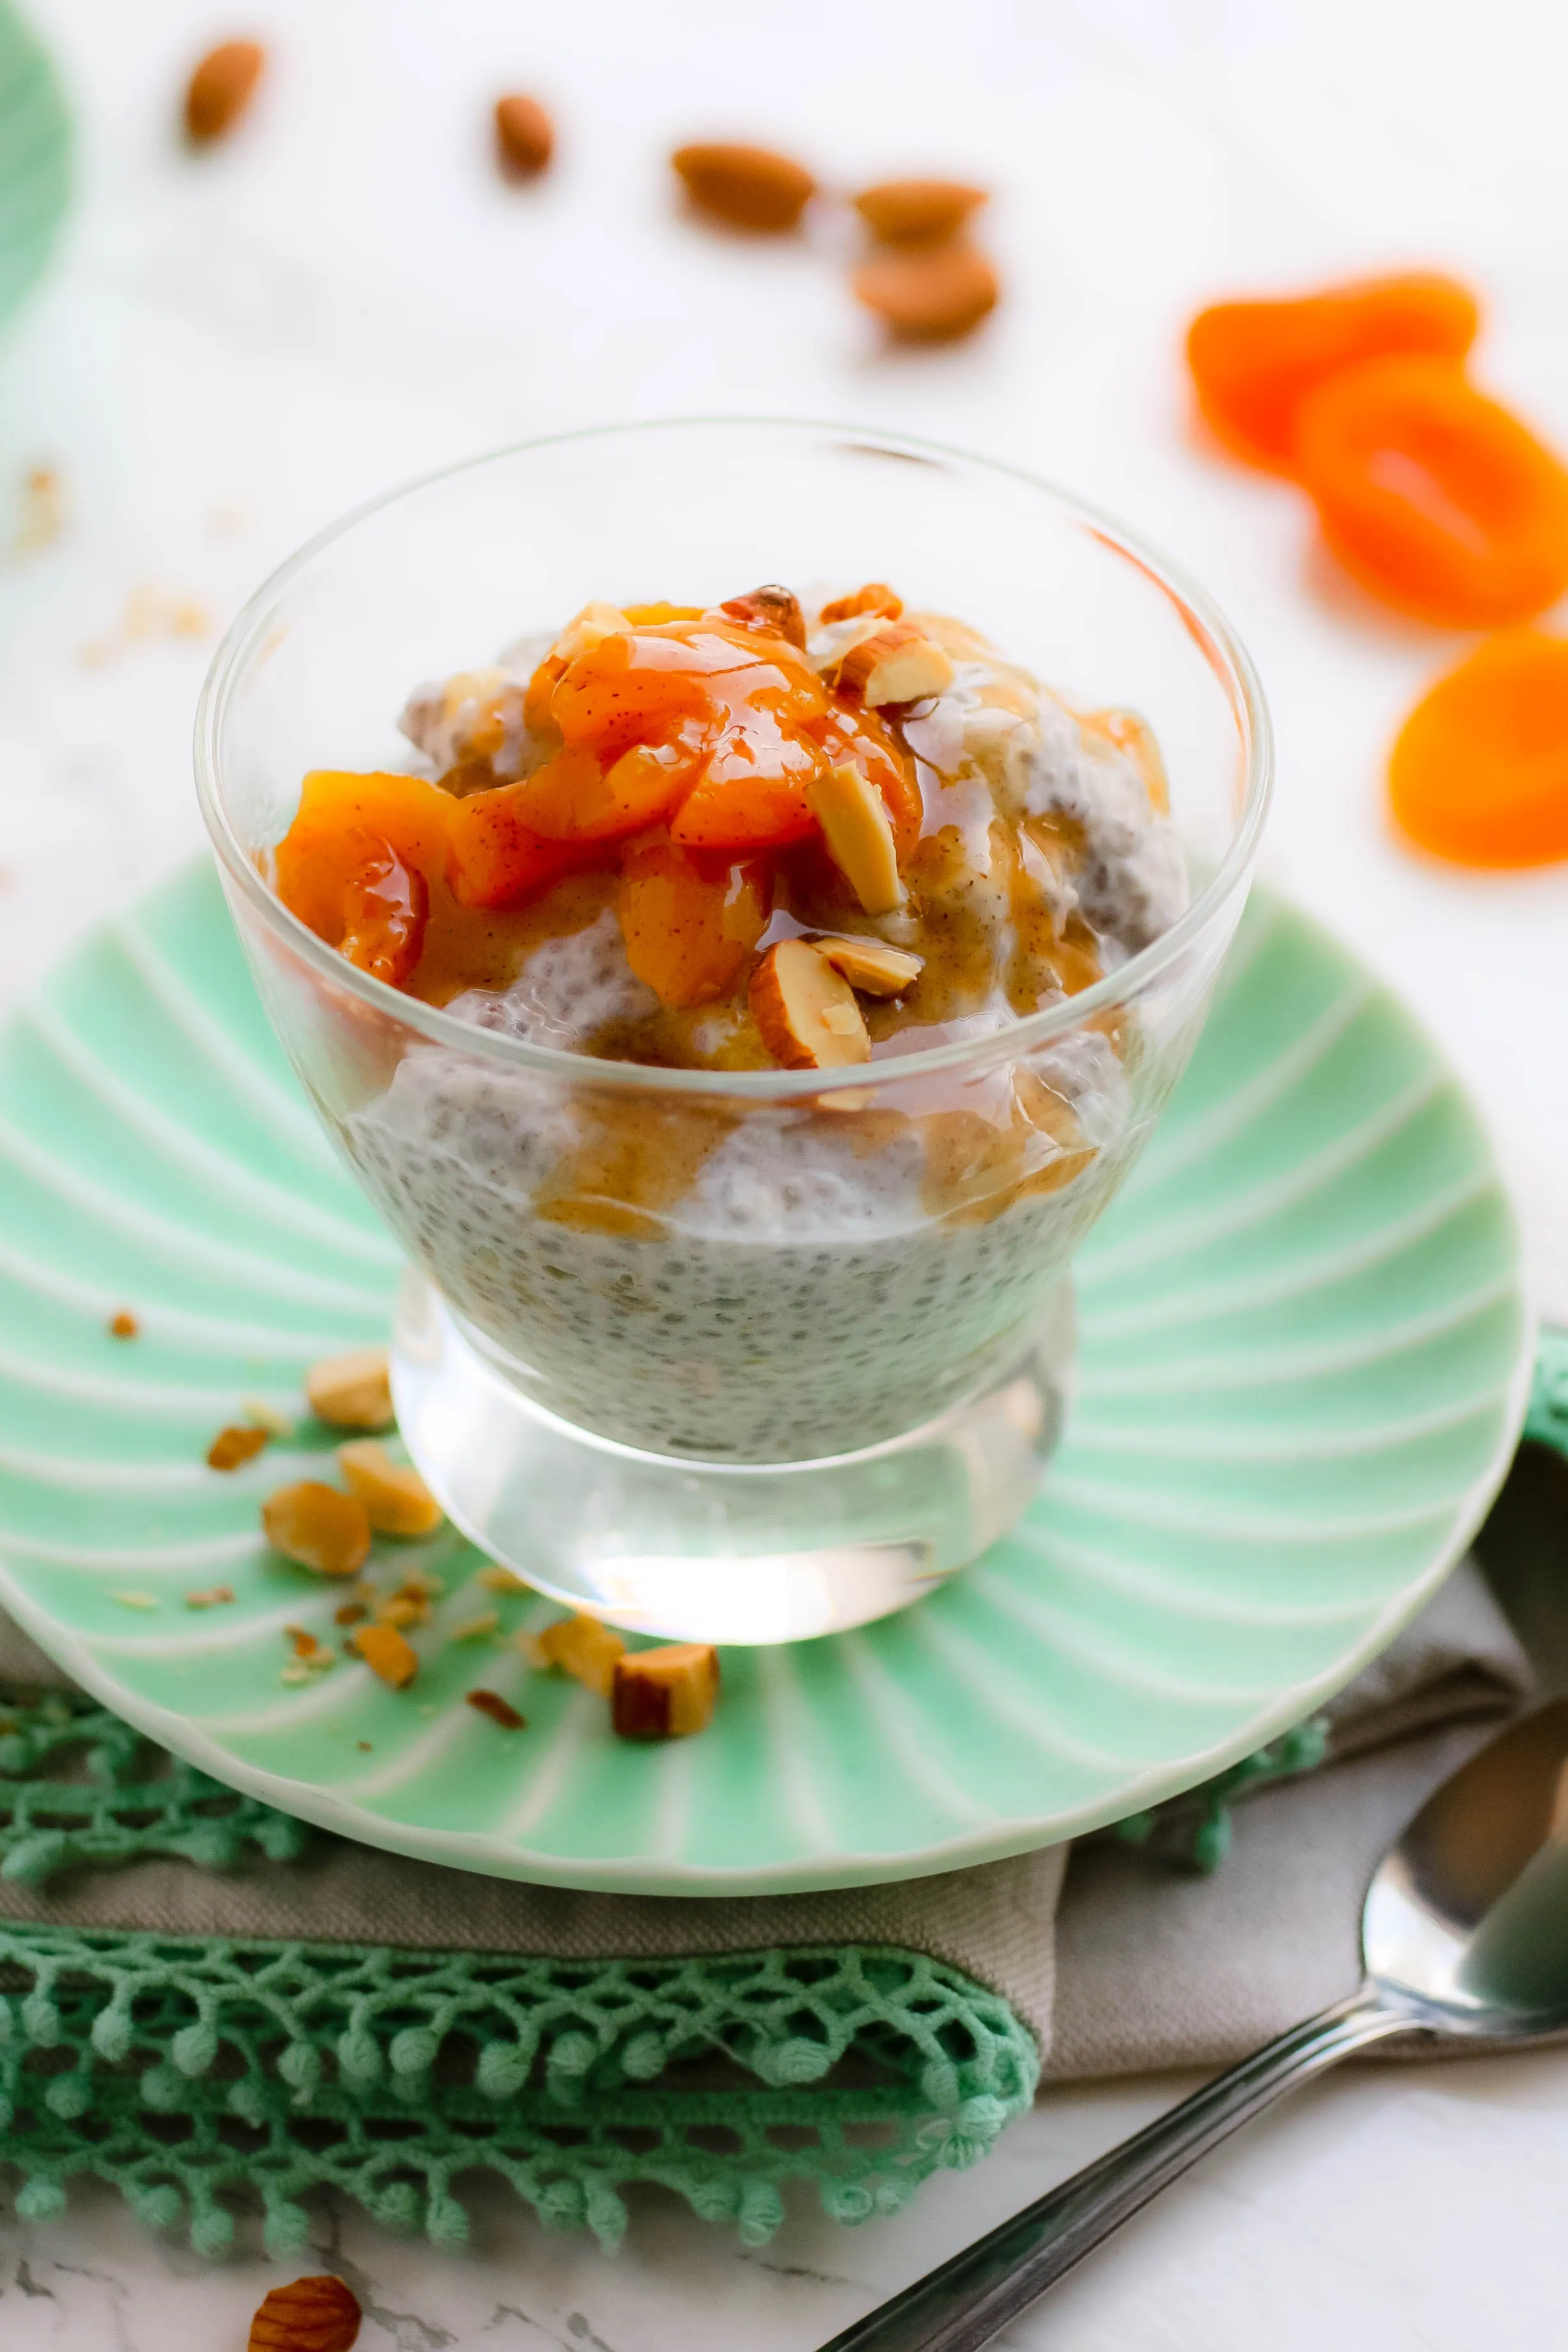 Almond-Apricot Breakfast Chia Pudding is perfect for breakfast! Almond-Apricot Breakfast Chia Pudding makes a great, healthy breakfast.